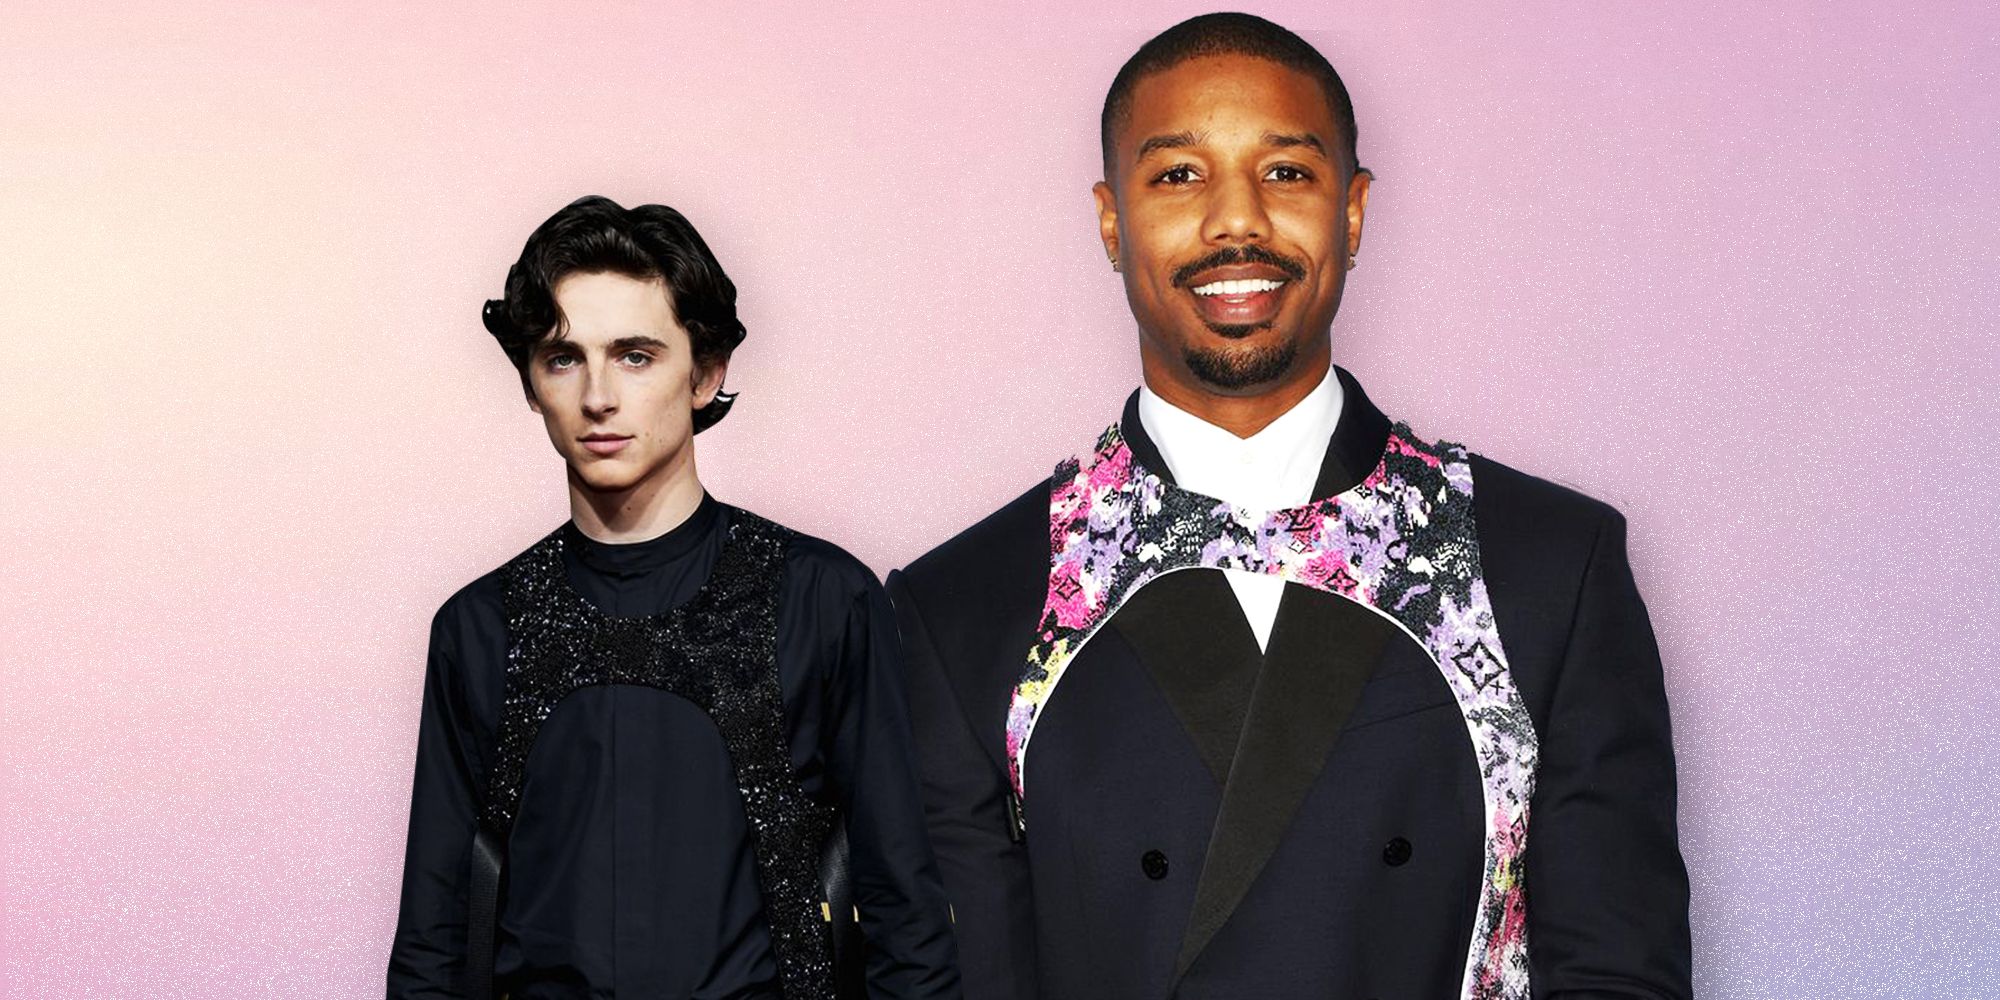 Spotted: Michael B. Jordan adopts the Louis Vuitton harness